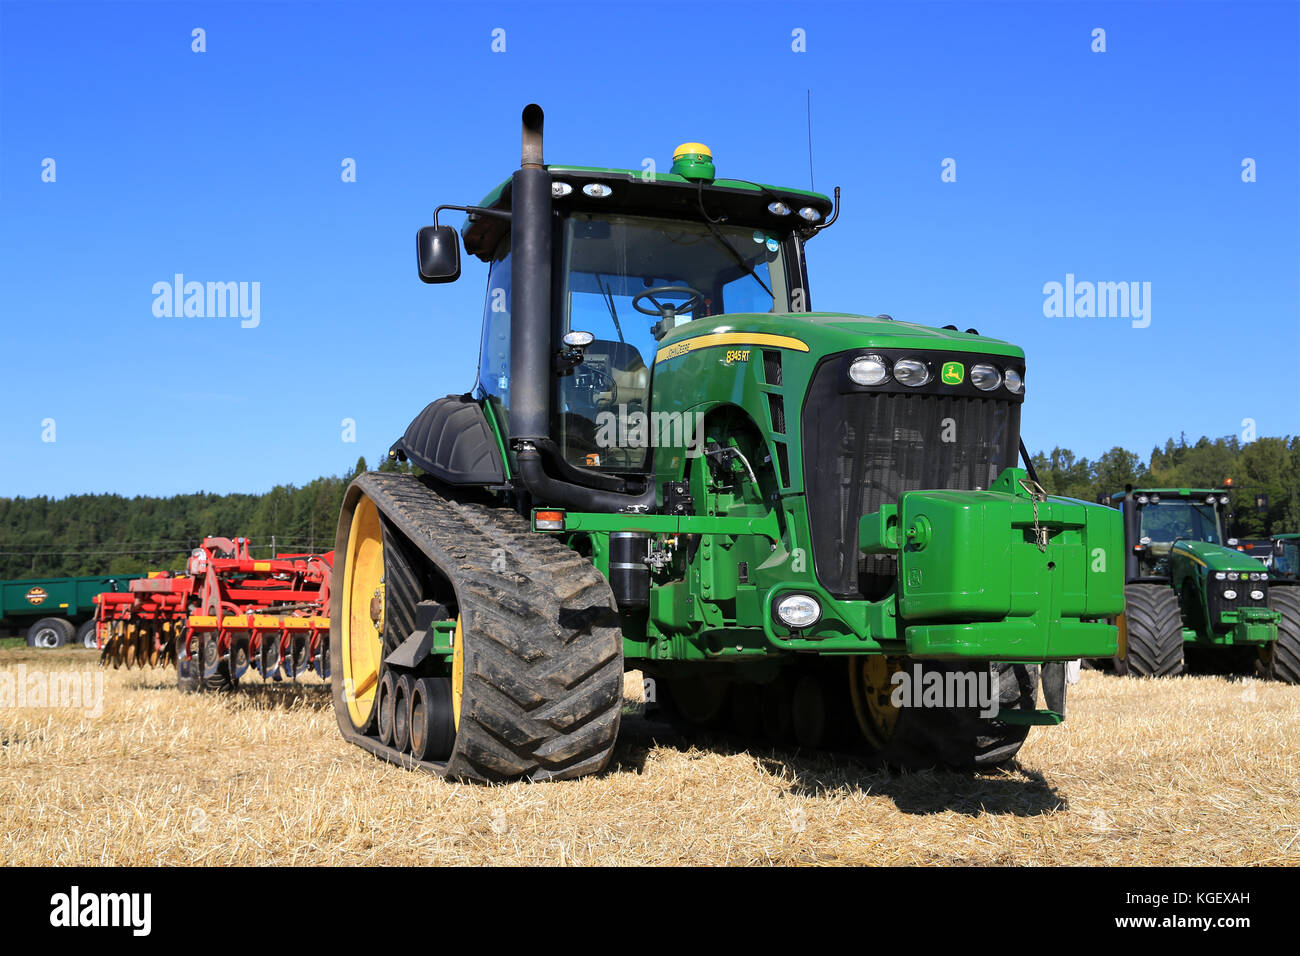 SALO, FINLAND - AUGUST 22, 2015: John Deere 8345RT tracked tractor and Vaderstad cultivator on display at Puontin Peltopaivat Agricultural Harvesting  Stock Photo